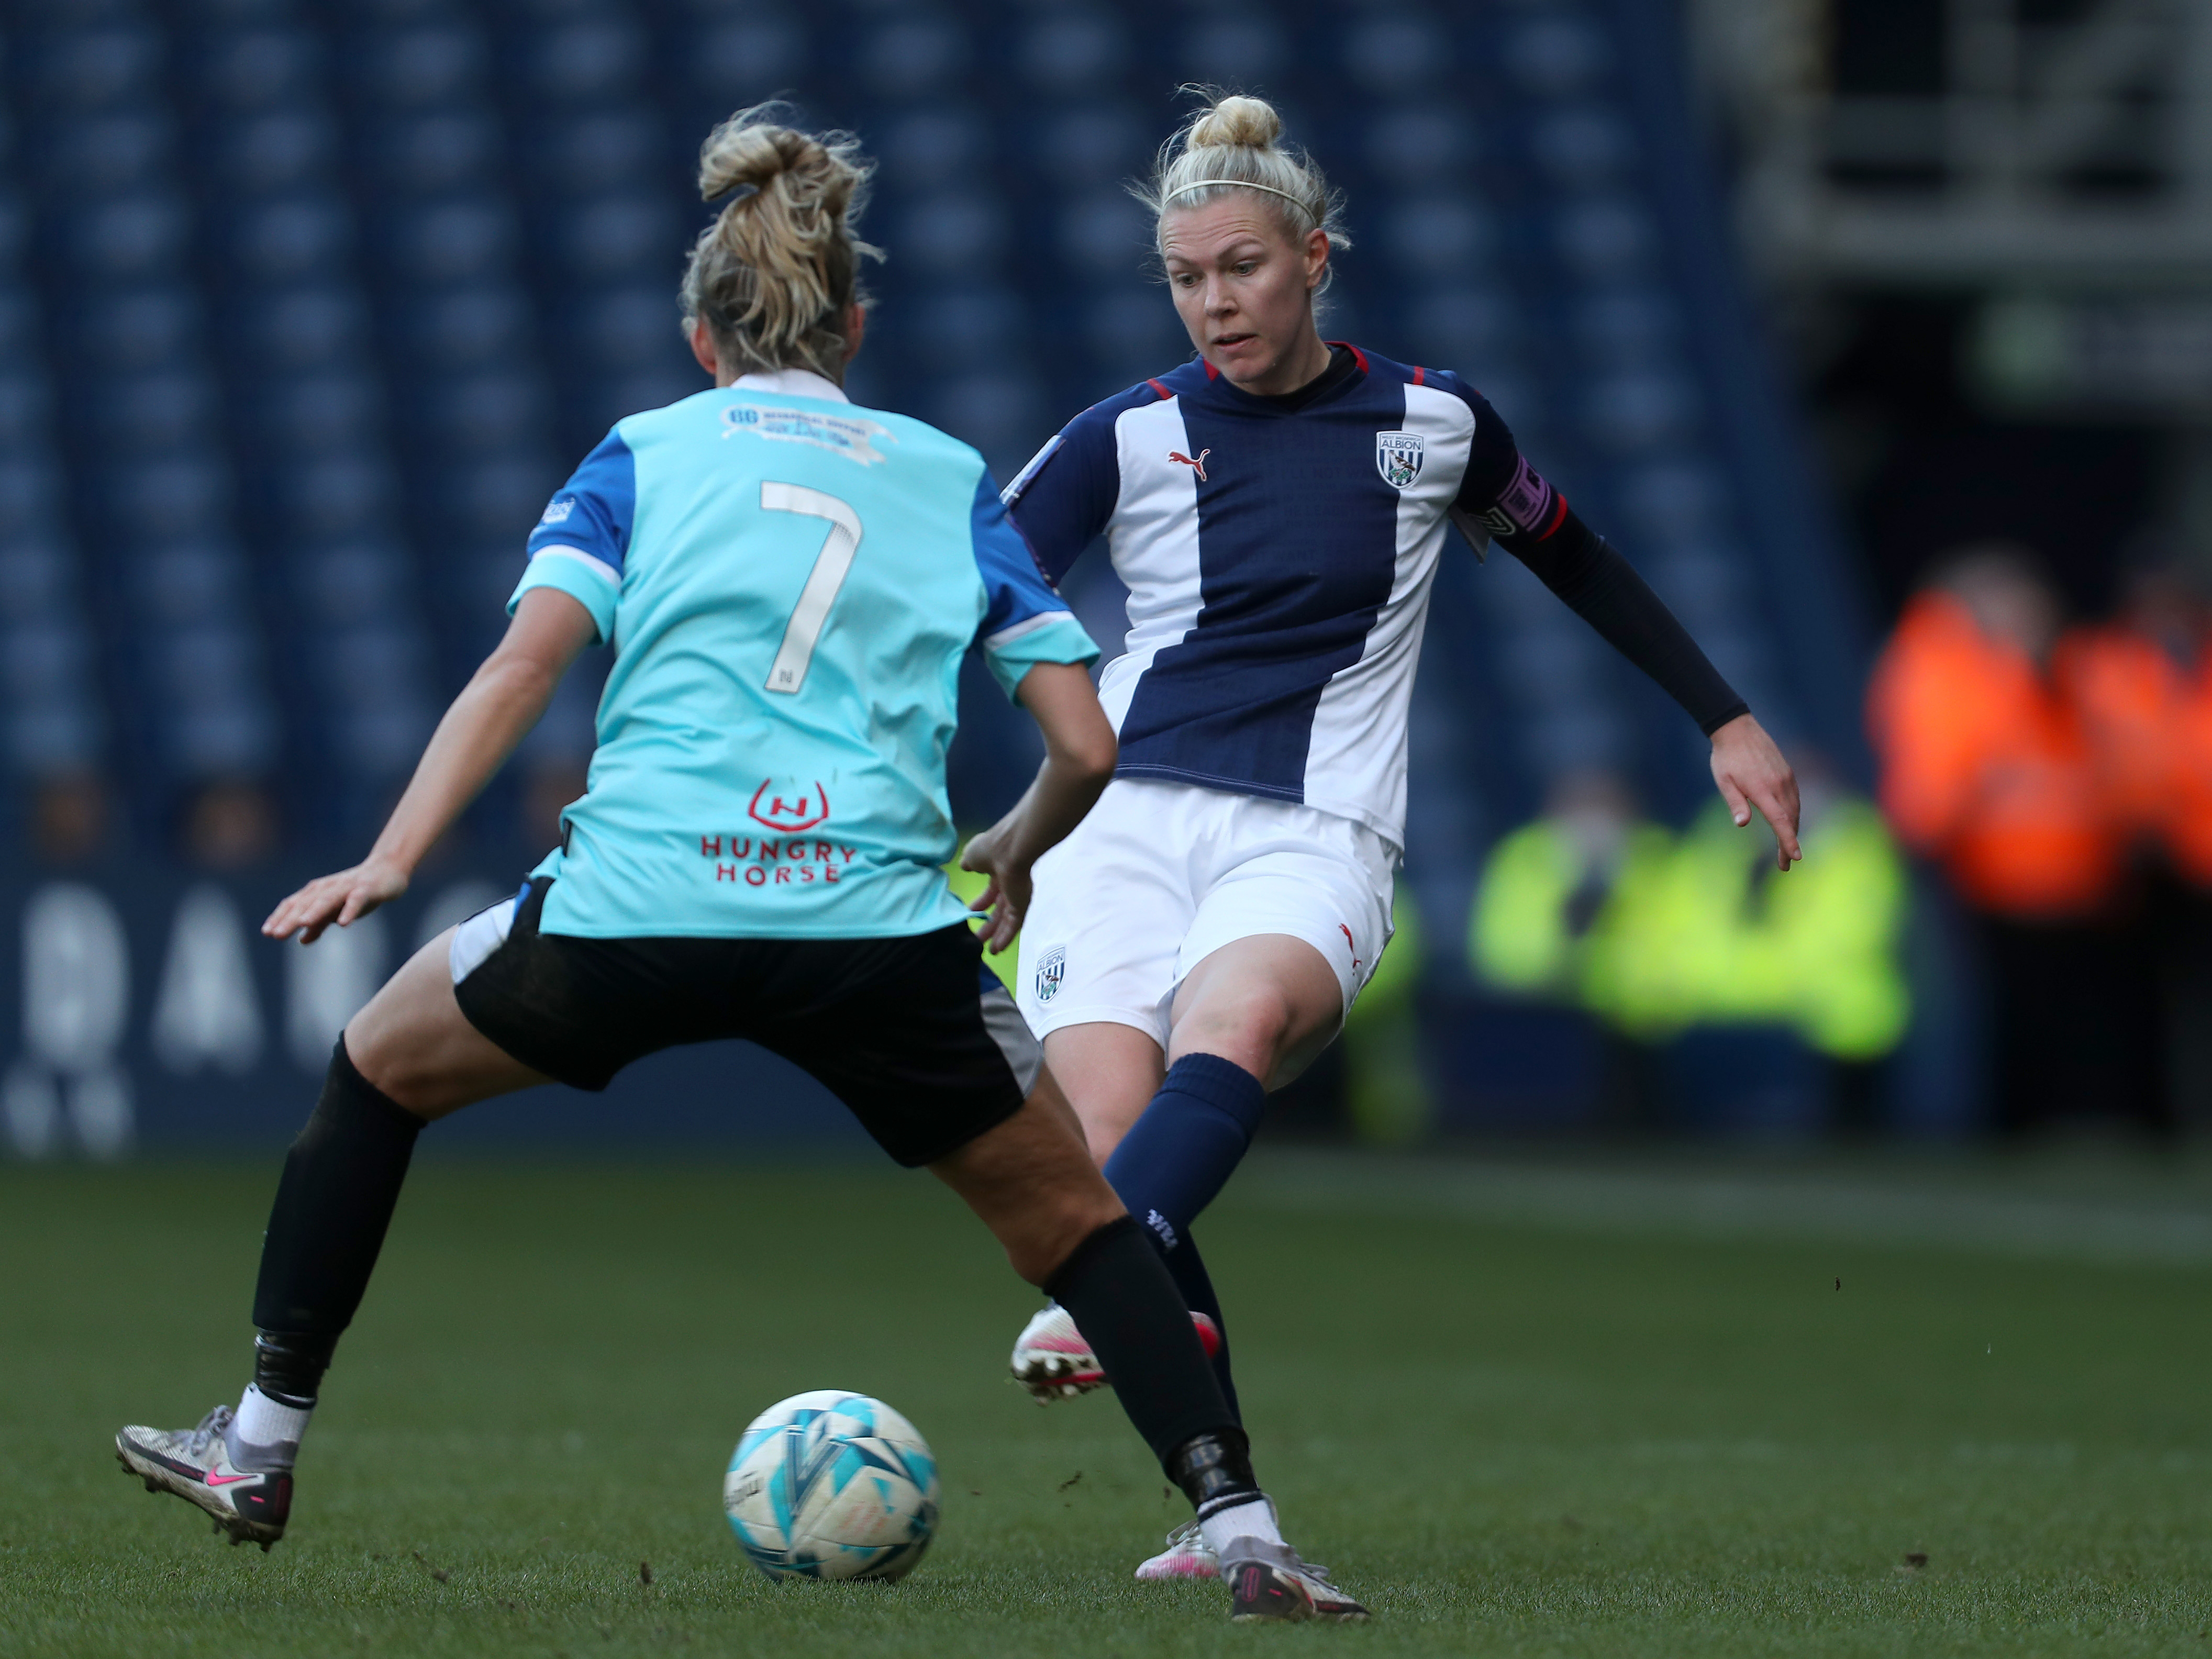 Albion Women marked their first-ever game at The Hawthorns with a win on Sunday afternoon – beating Derby County 2-0 in front of 1,871 supporters